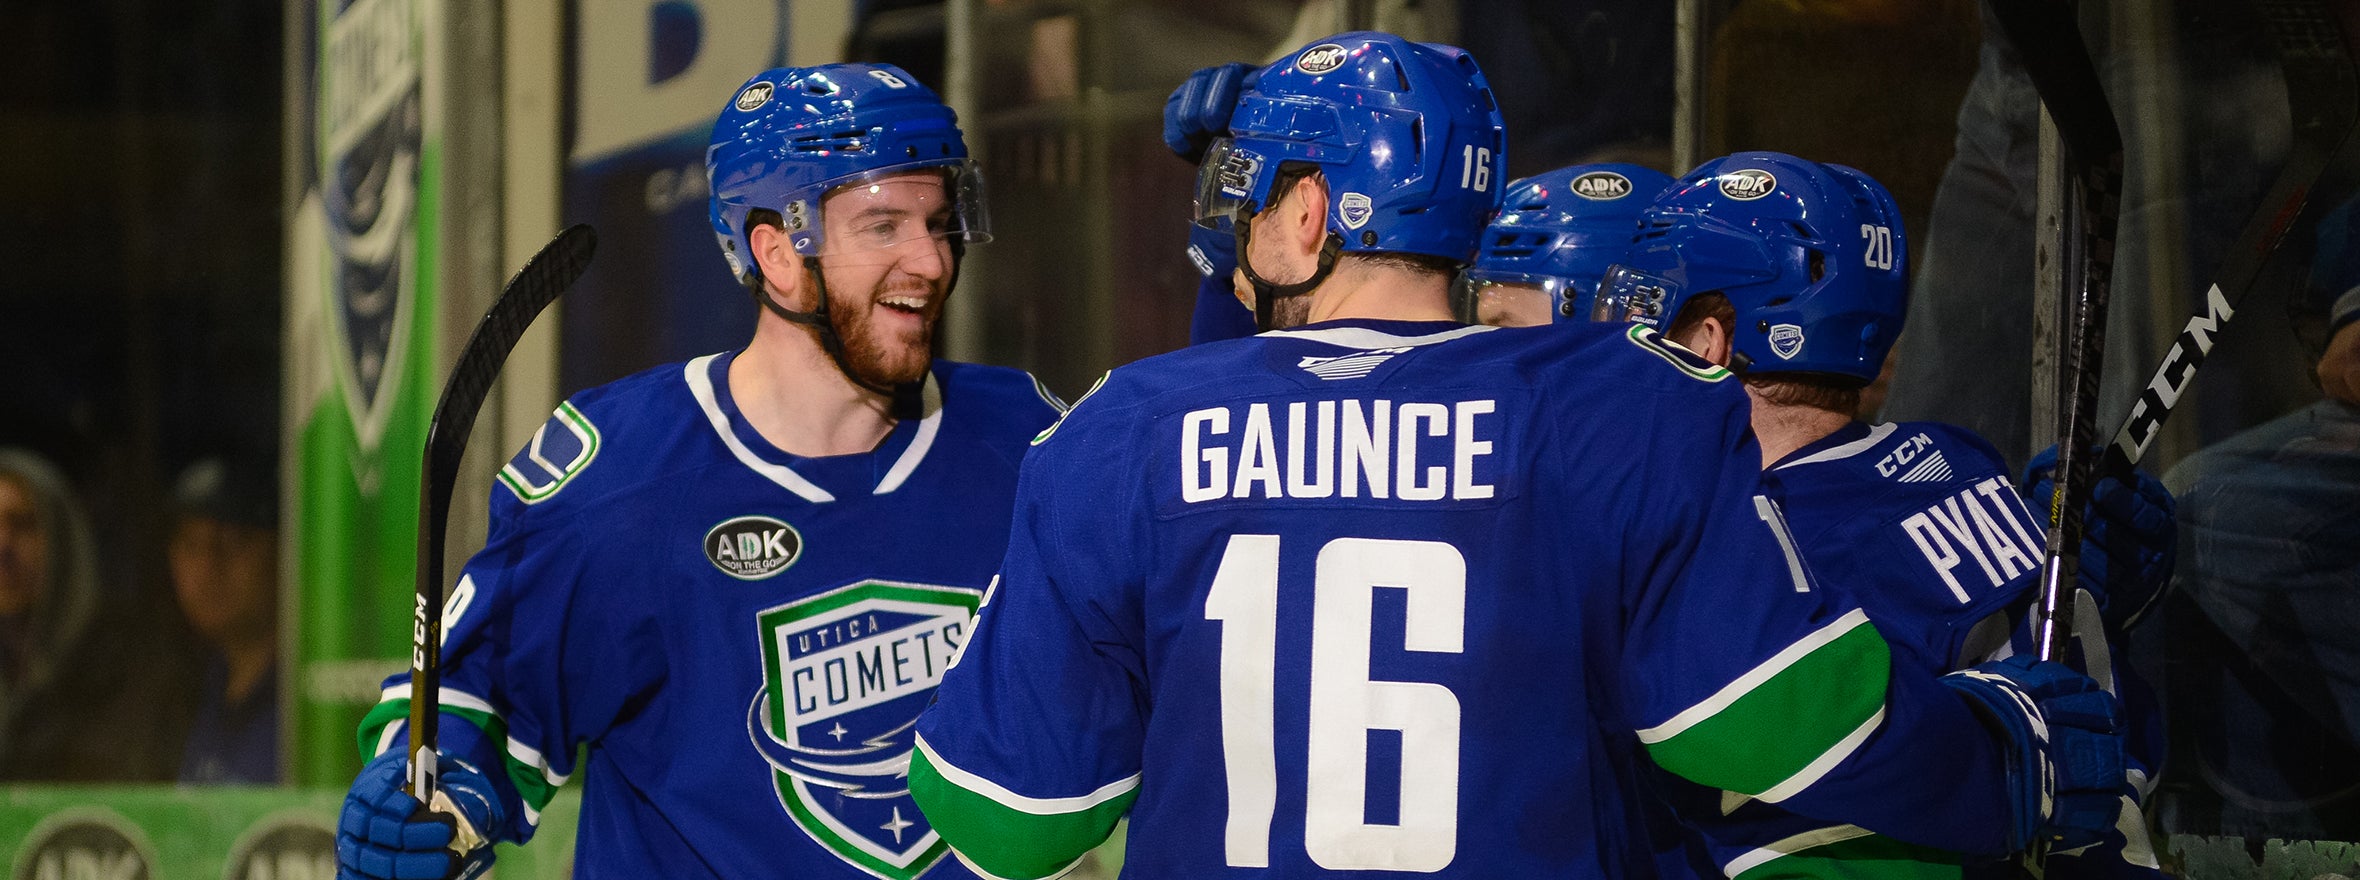 COMETS SNAP WINLESS SKID WITH SHOOTOUT WIN